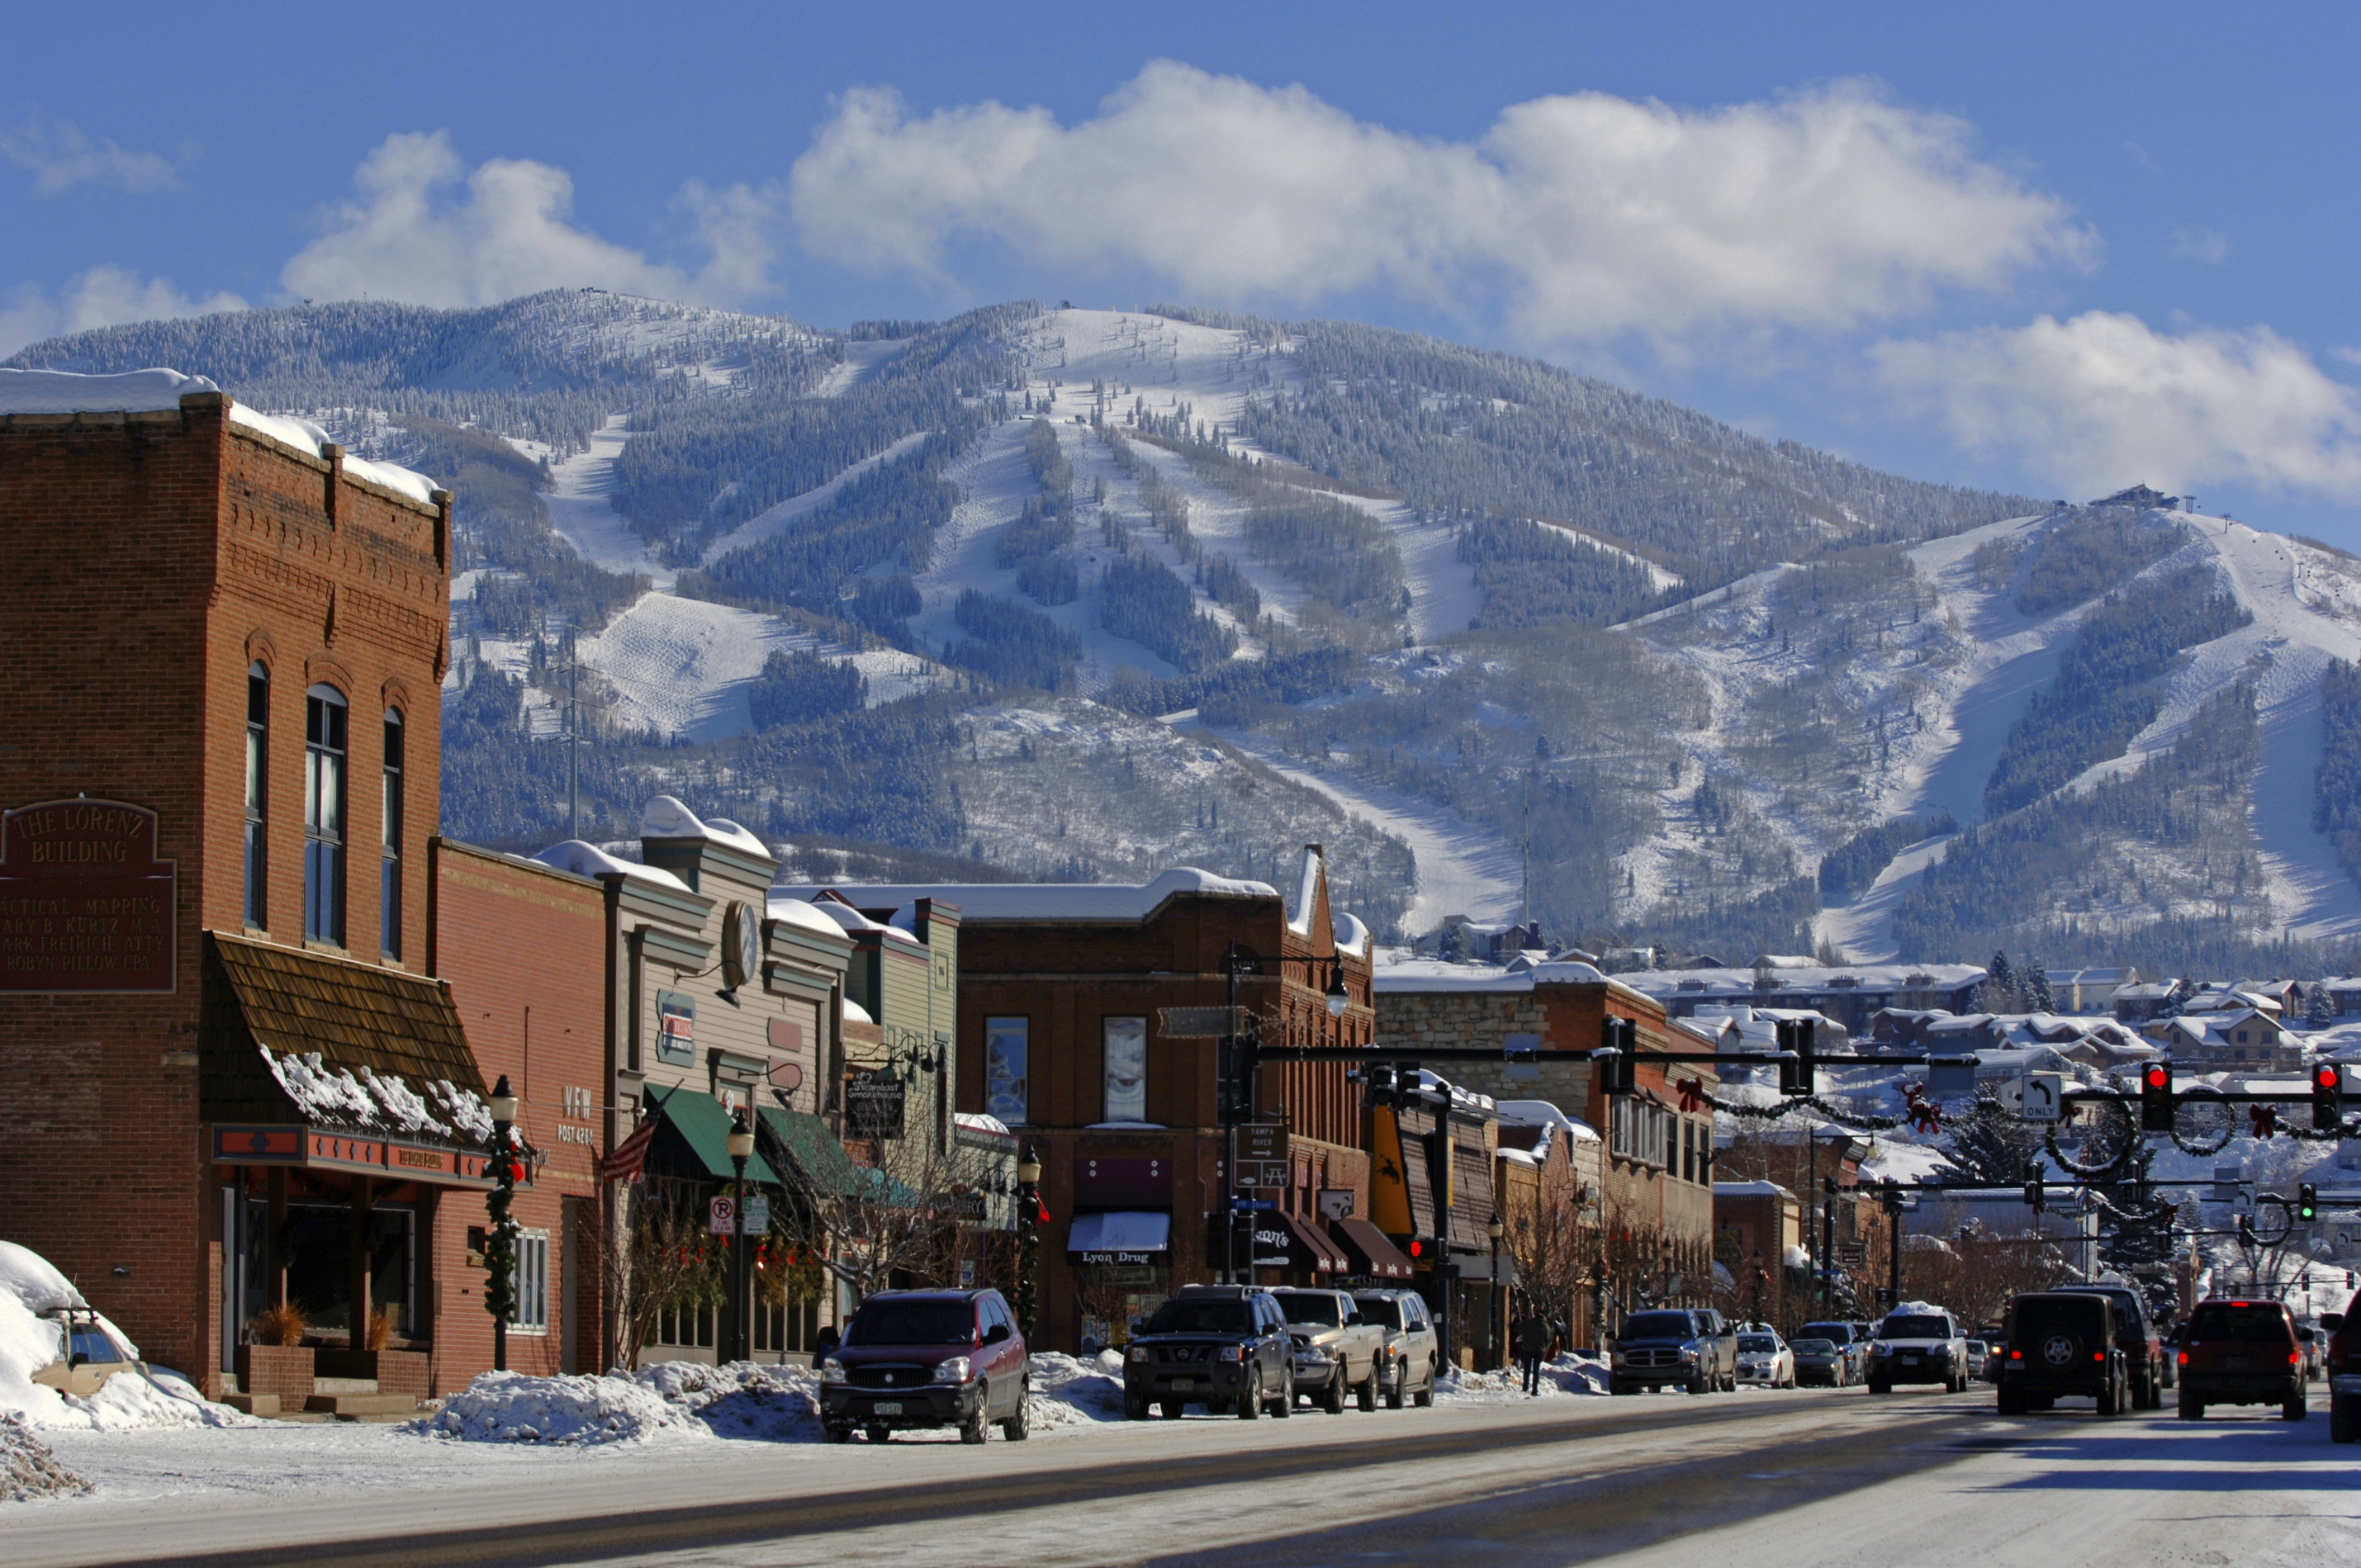 5-things-we-love-about-steamboat-springs-get-discount-lift-tickets-at